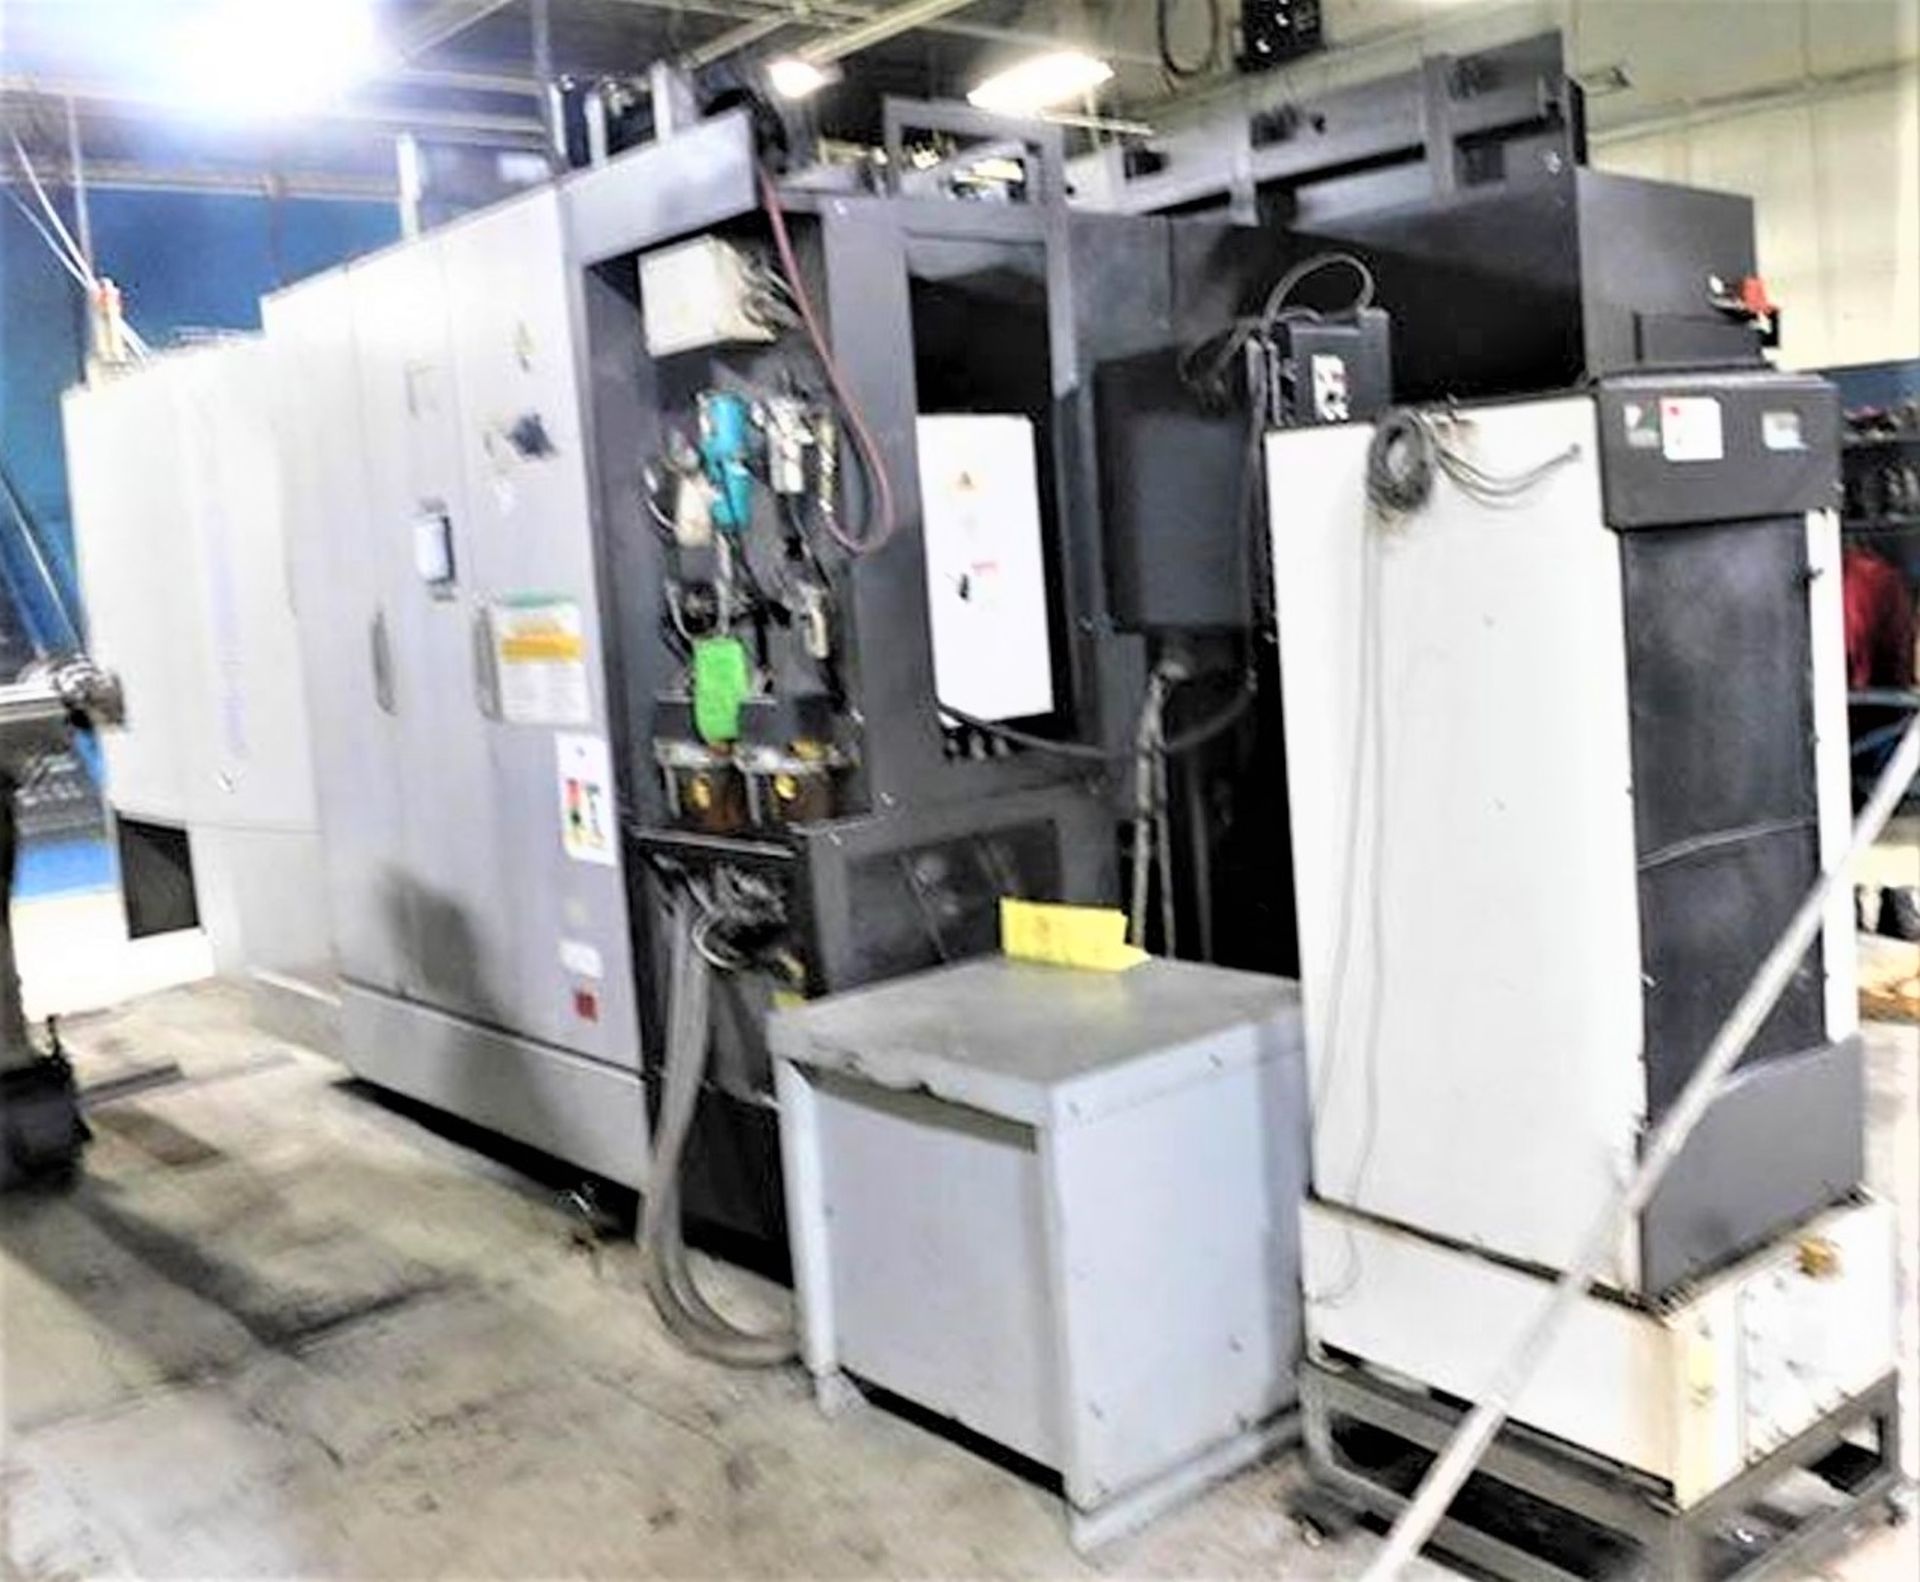 24.8" X 24.8" Pallets Toyoda FH630SX CNC 4-Axis Horizontal Machining Center, S/N NS1429, New 2006 - Image 6 of 10